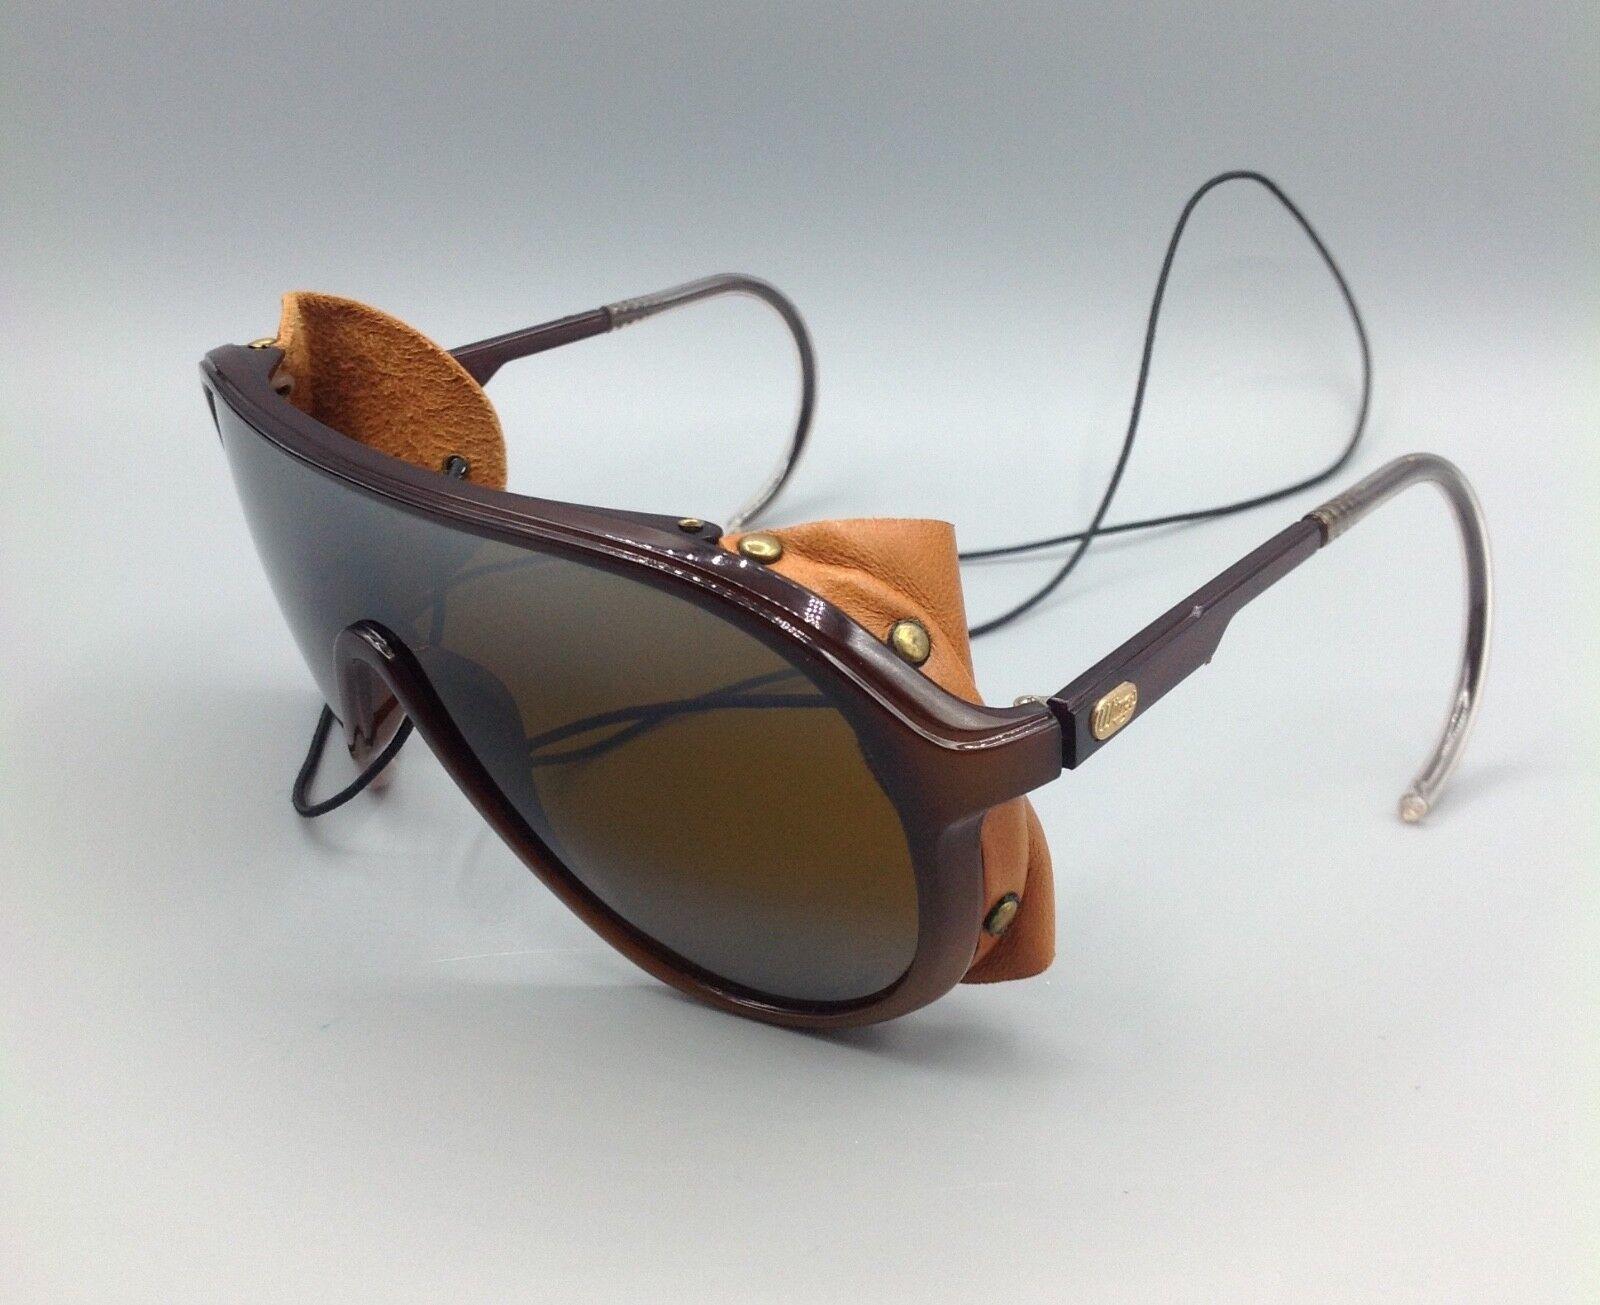 RAY BAN Wings Bausch&Lomb B&L frame sunglasses lunettes occhiale da sole